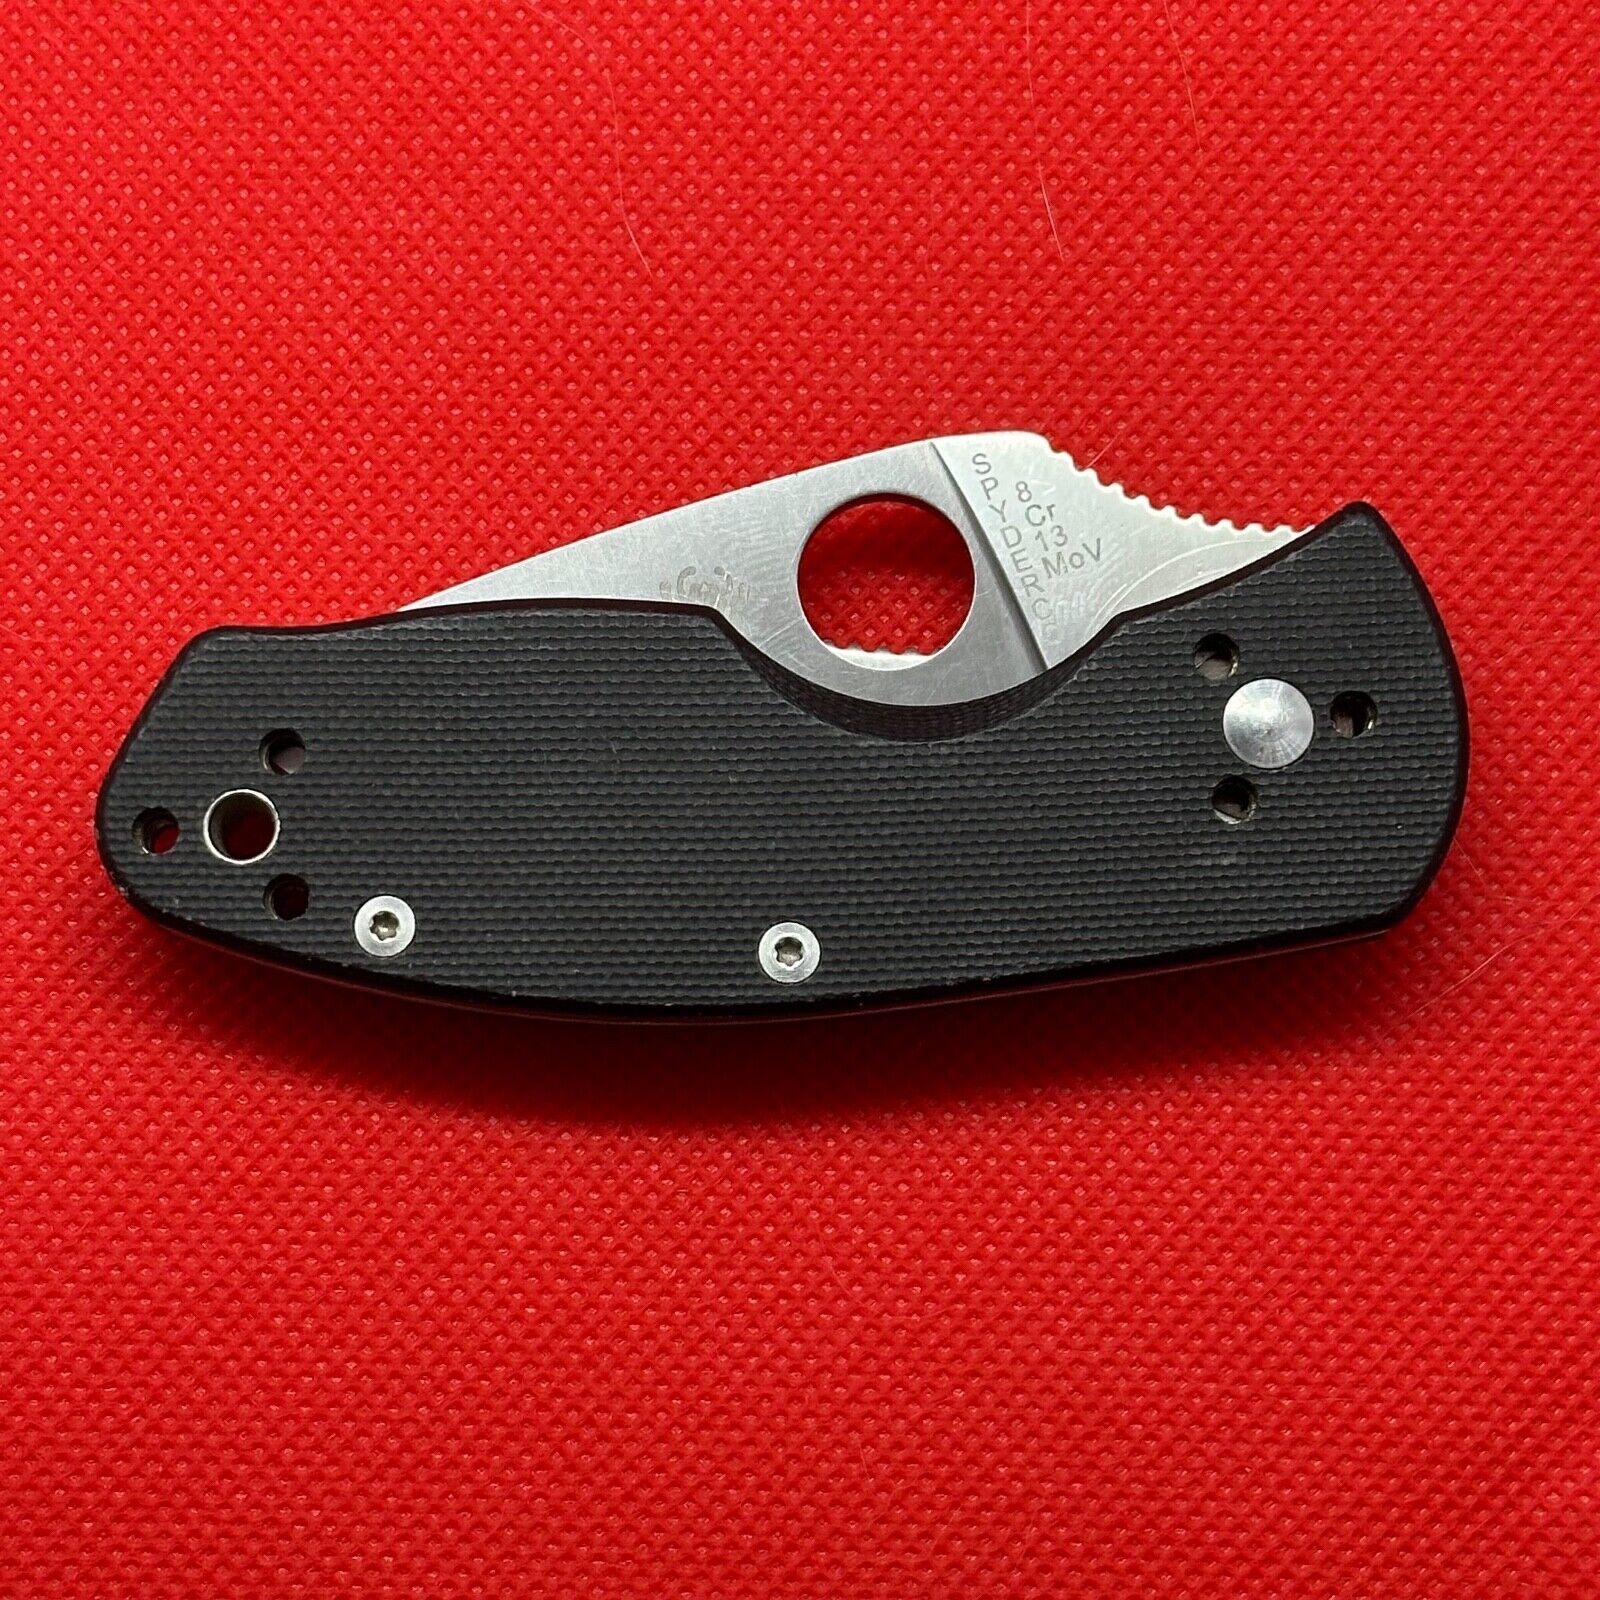 Spyderco C148GP Ambitious Stainless Steel Folding Liner Lock Pocket Knife EDC - $48.49